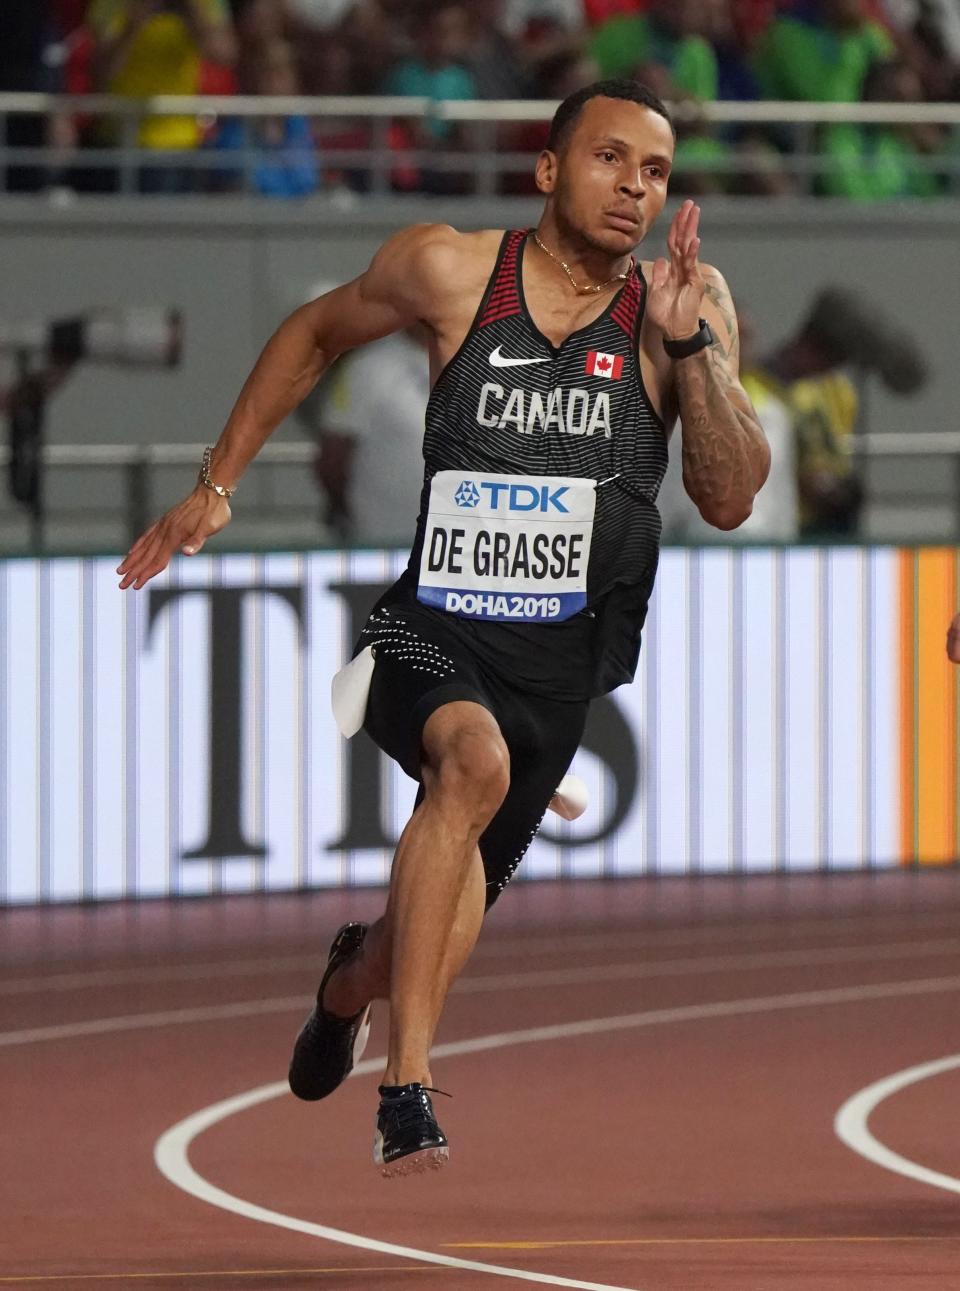 Andre De Grasse of Canada wins his heat at the most recent world championships, held in Doha, Qatar.